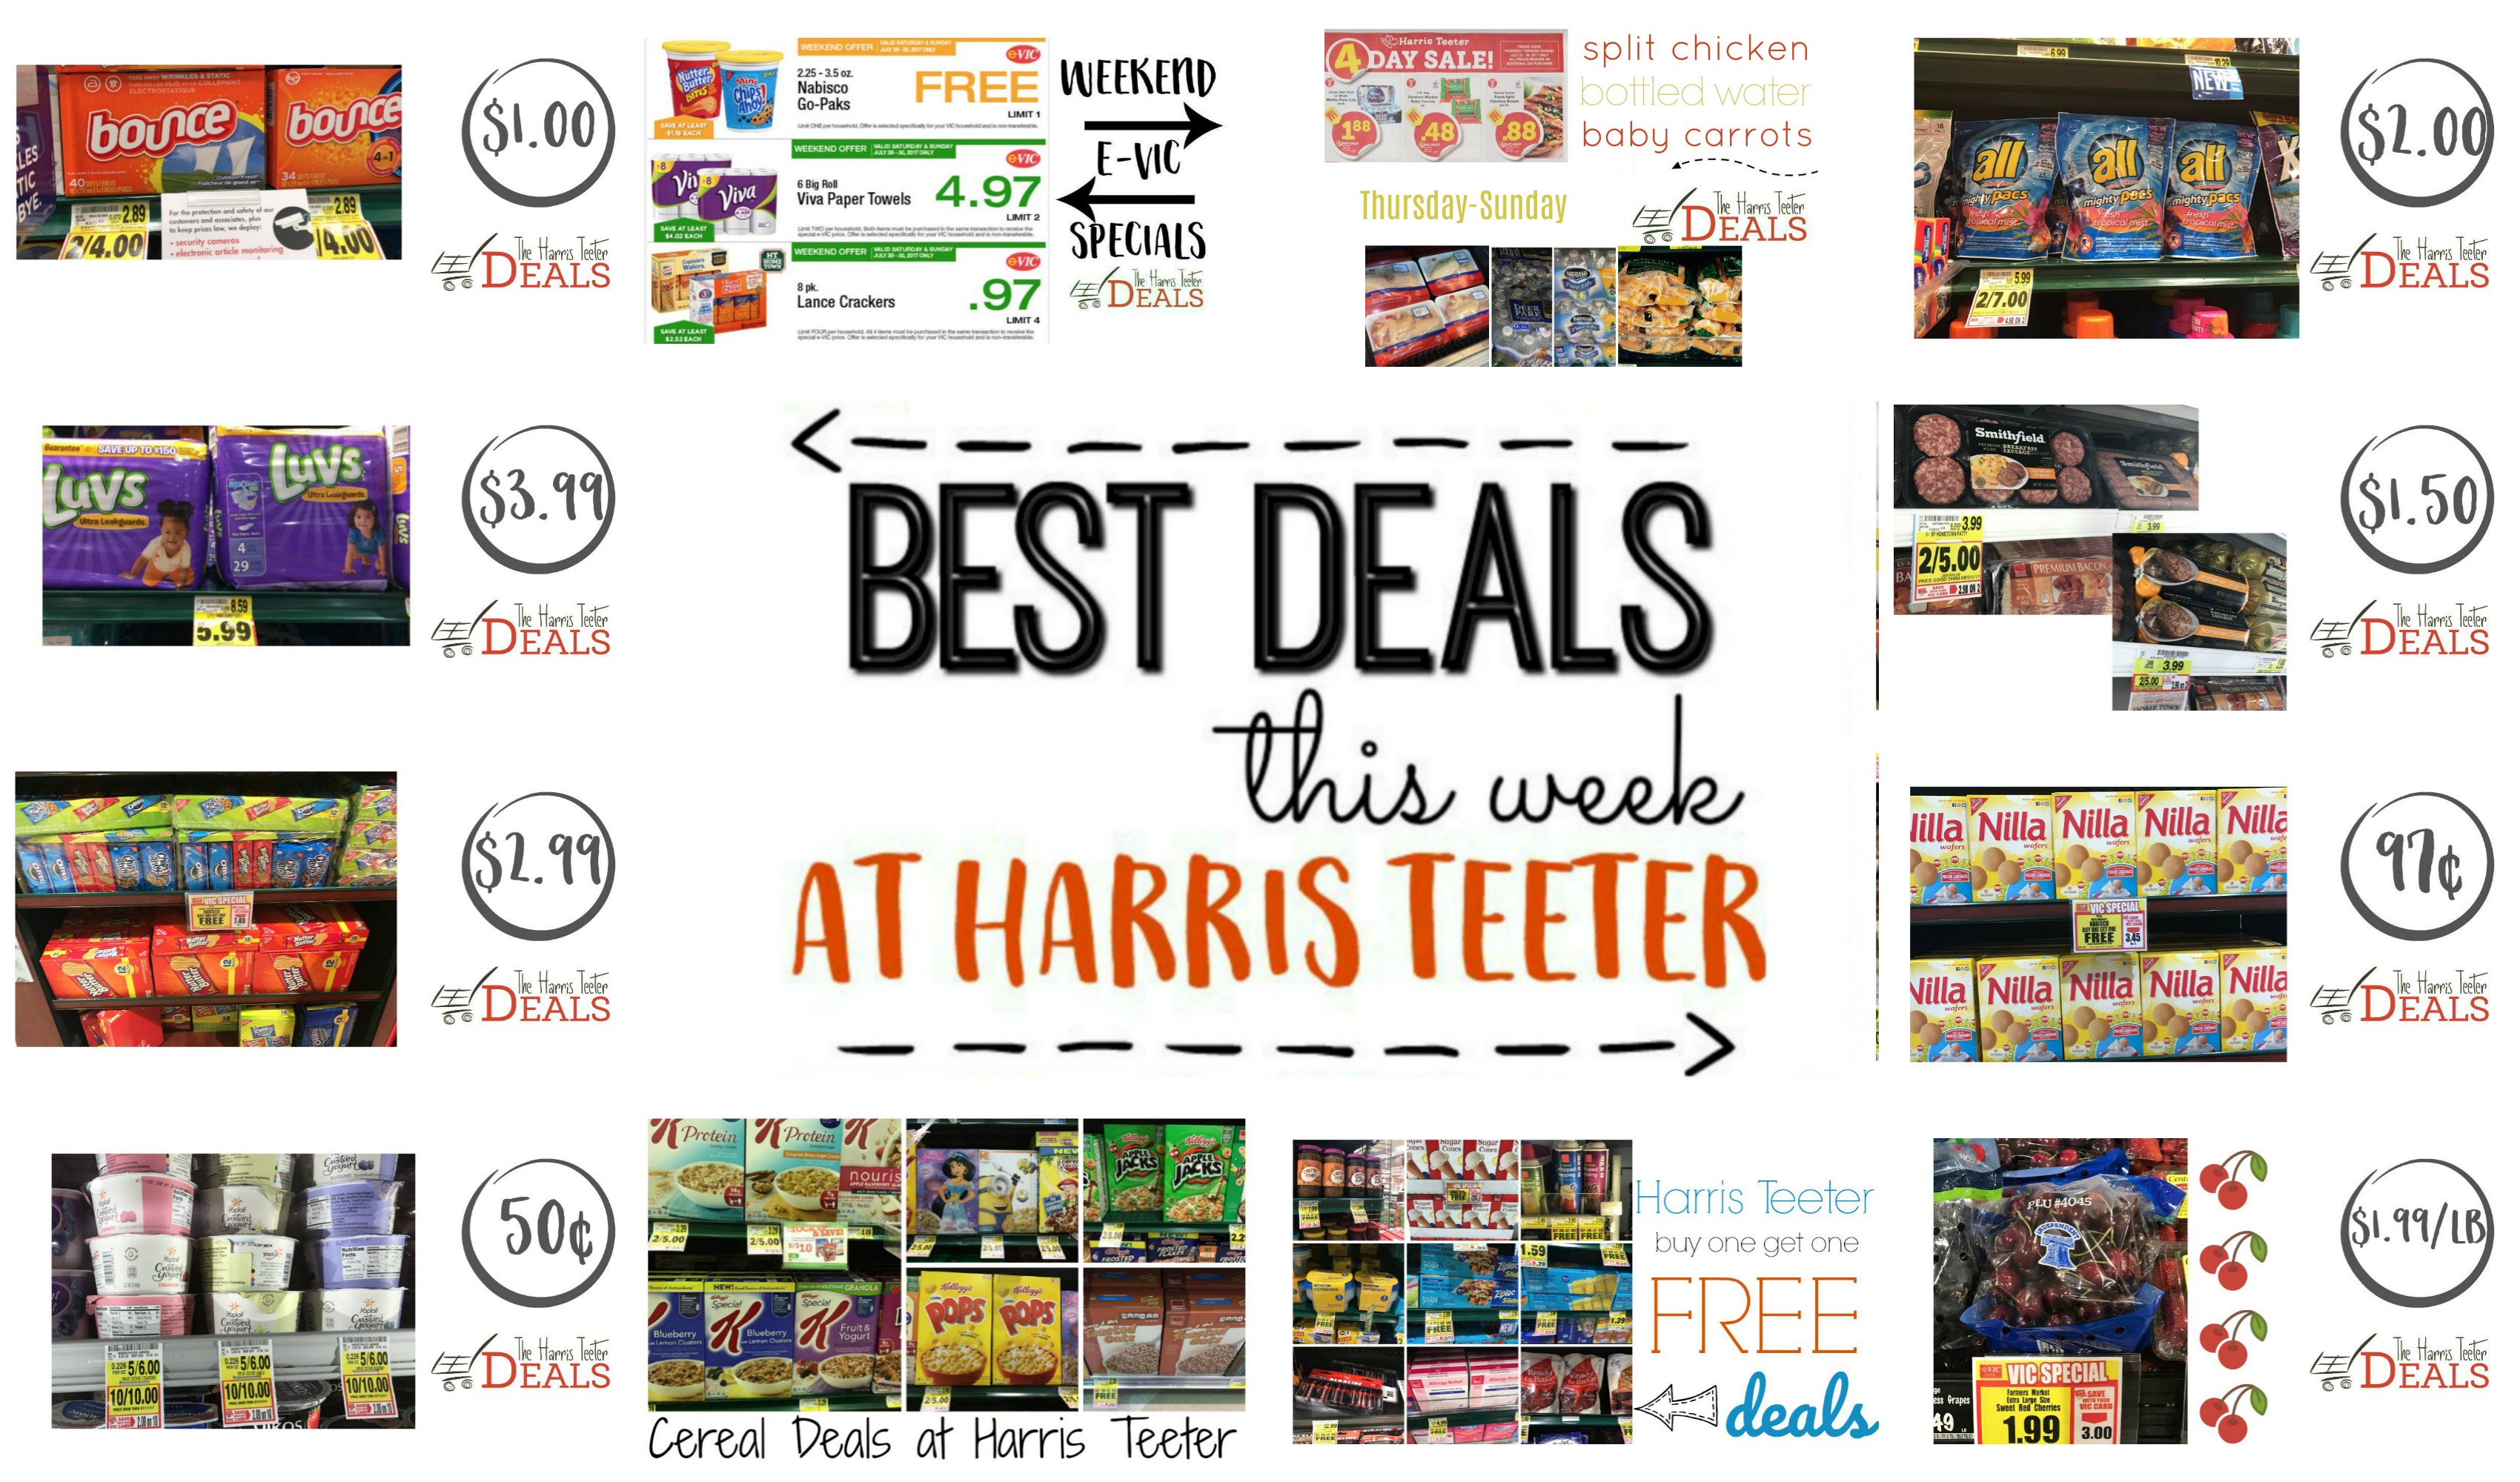 We Ve Have A Full Week Of Deals At Harris Teeter I Rounded Up All The Best This Here In One Post Don T Forget To Pick Your Free Sco